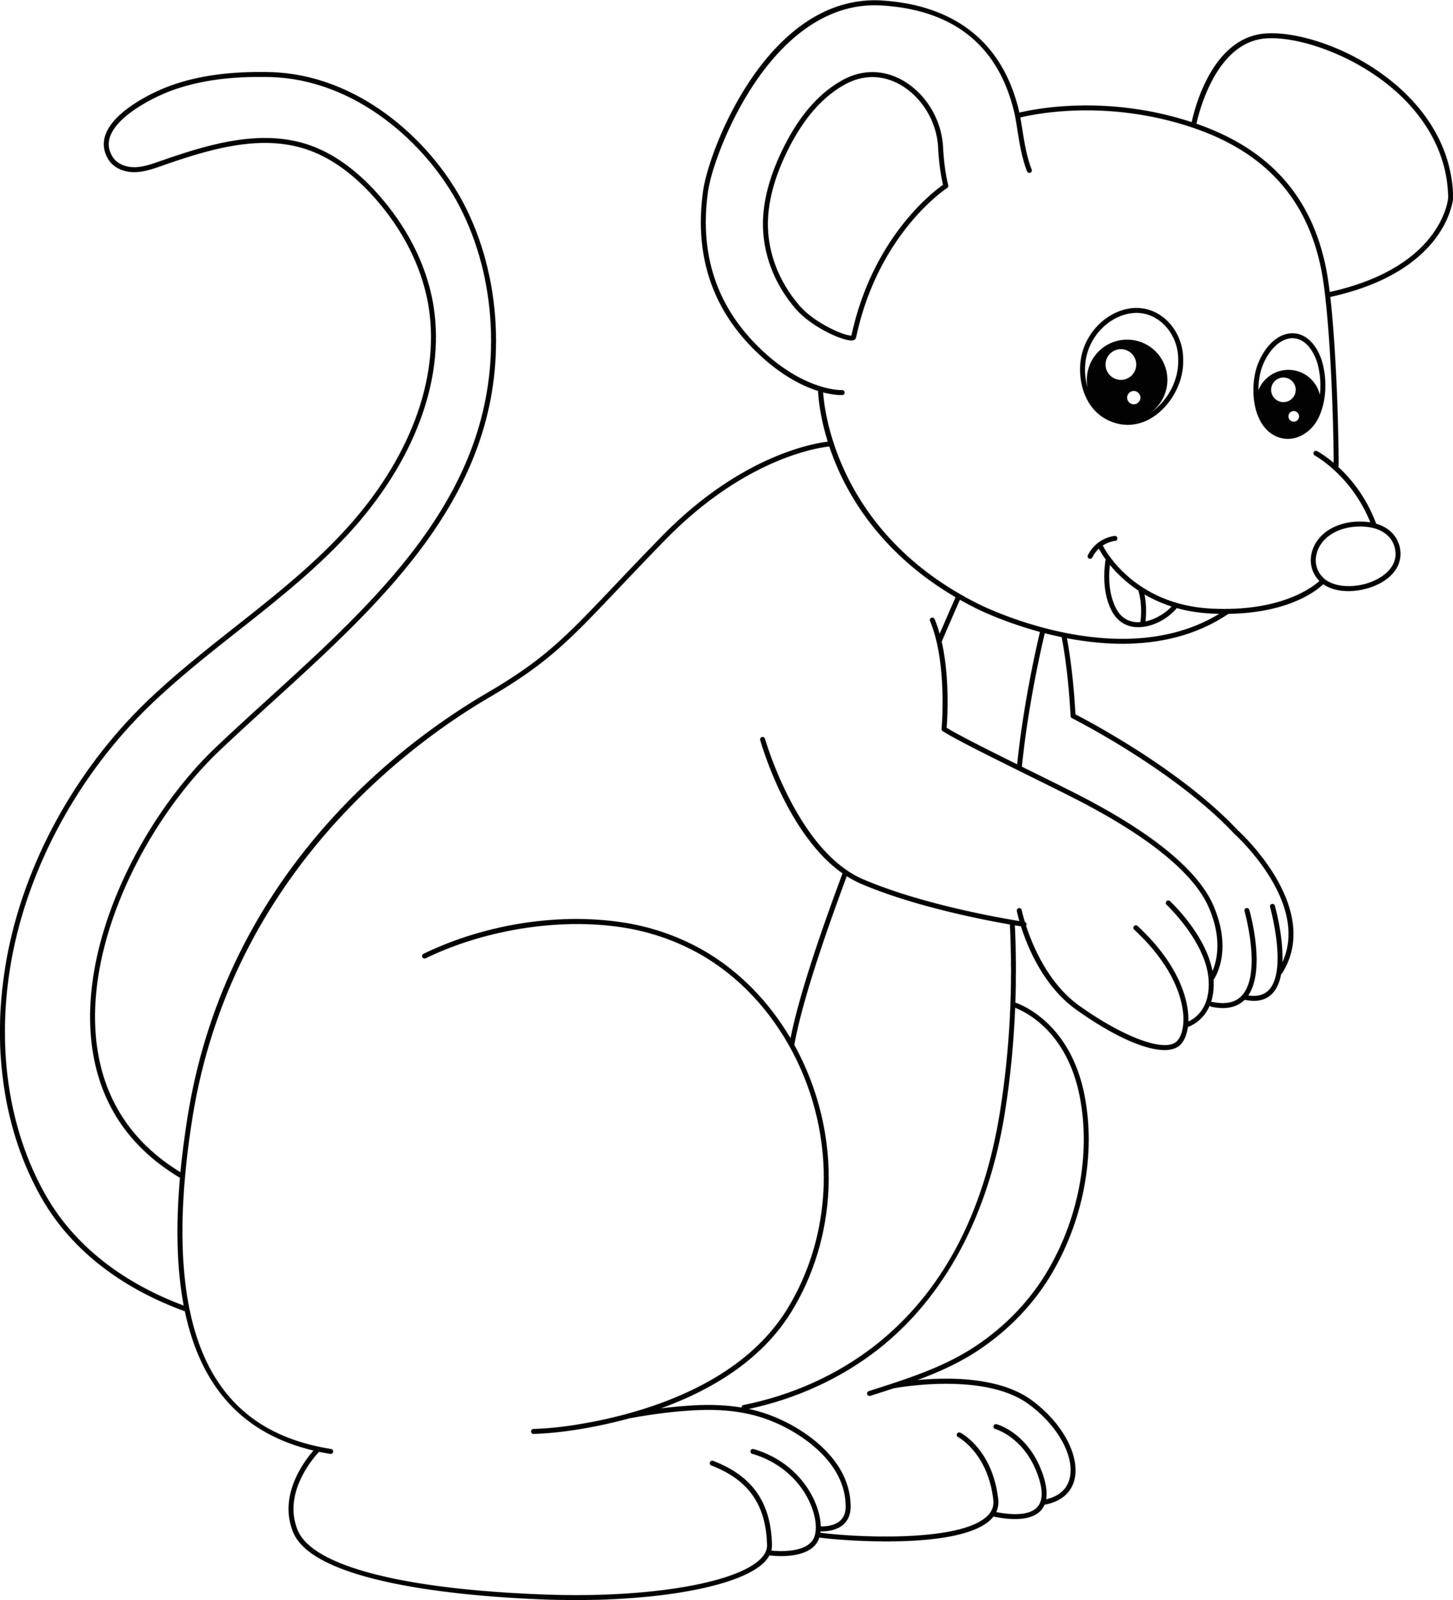 Mouse Coloring Page Isolated for Kids by abbydesign